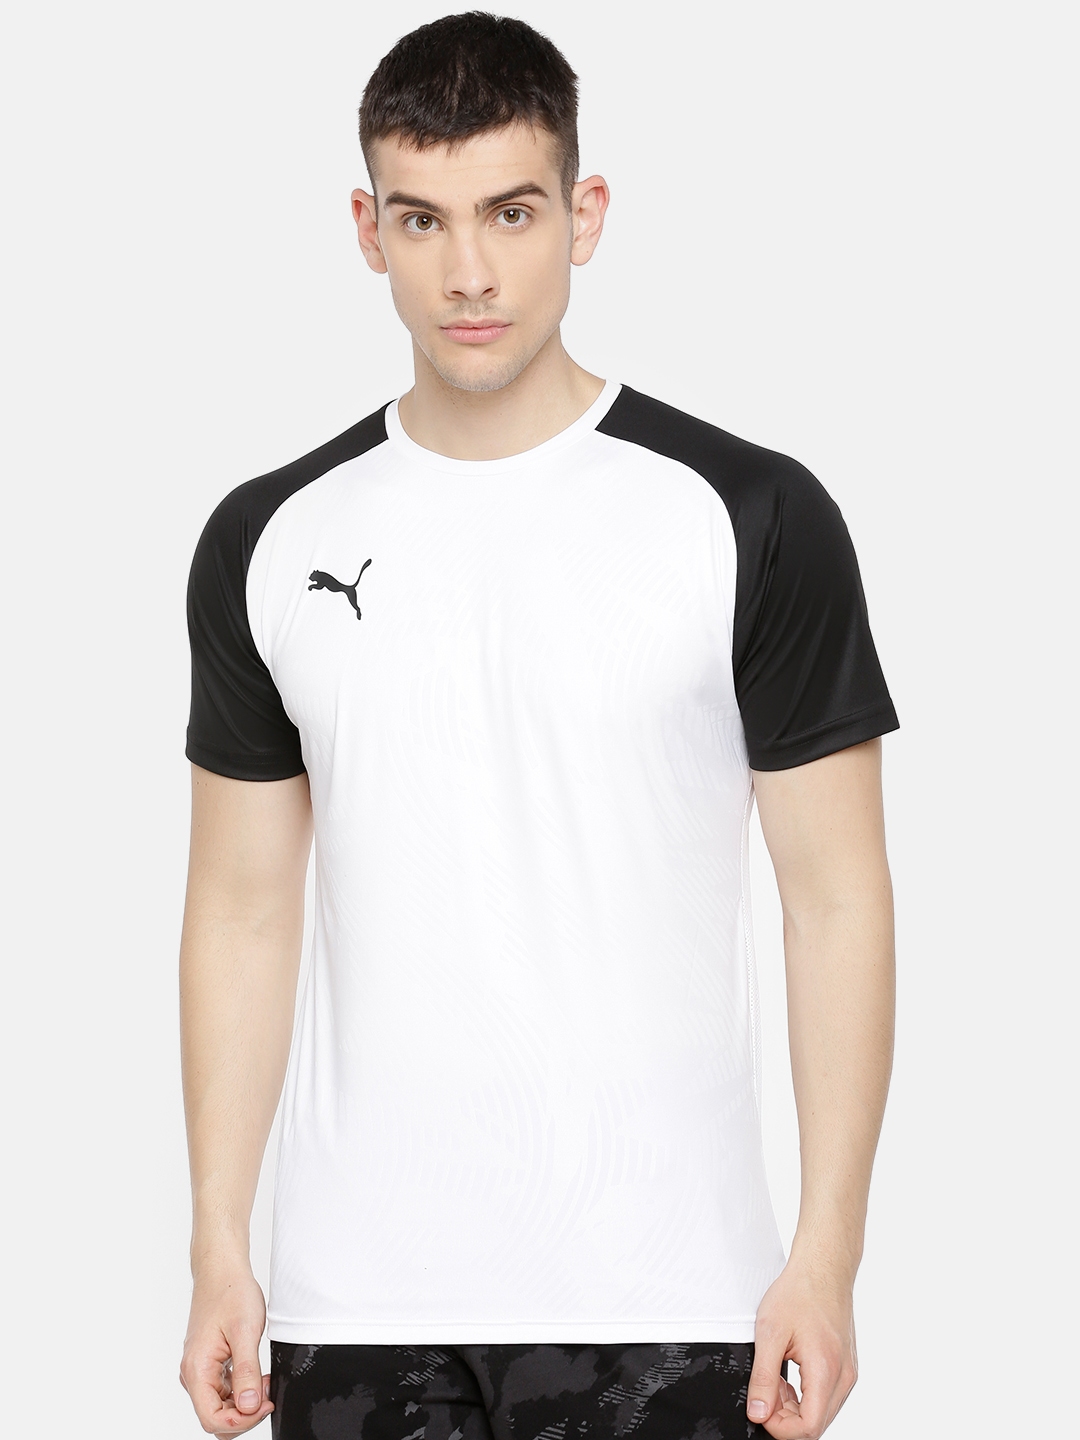 Buy Puma Men White & Black Solid CUP Round Neck DryCell Training T ...